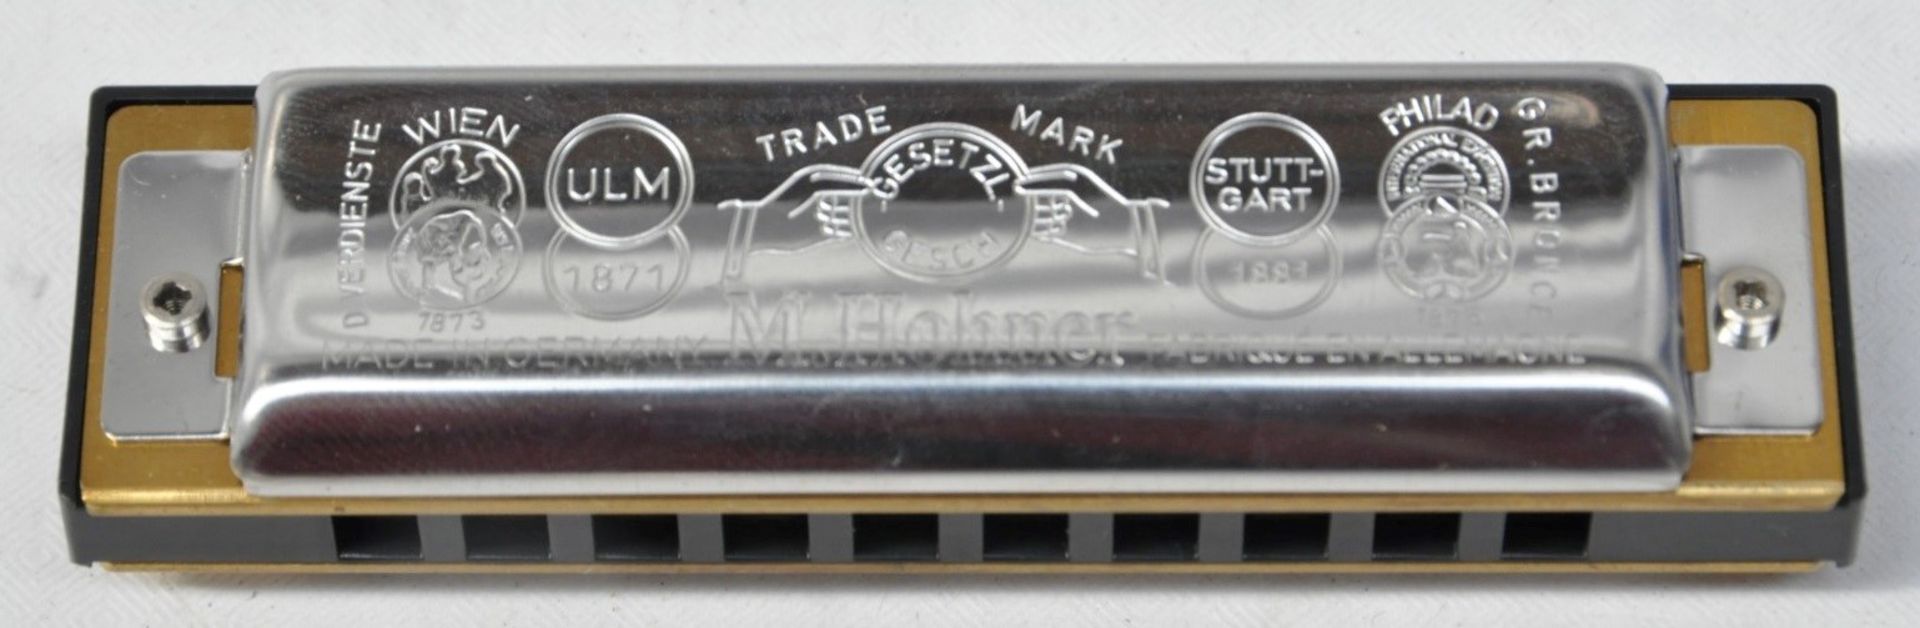 1 x Hohner Big River Harp Mouth Harmonica - Made in Germany - Key G - CL020 - Ref Pro89 - Unused - Image 2 of 5